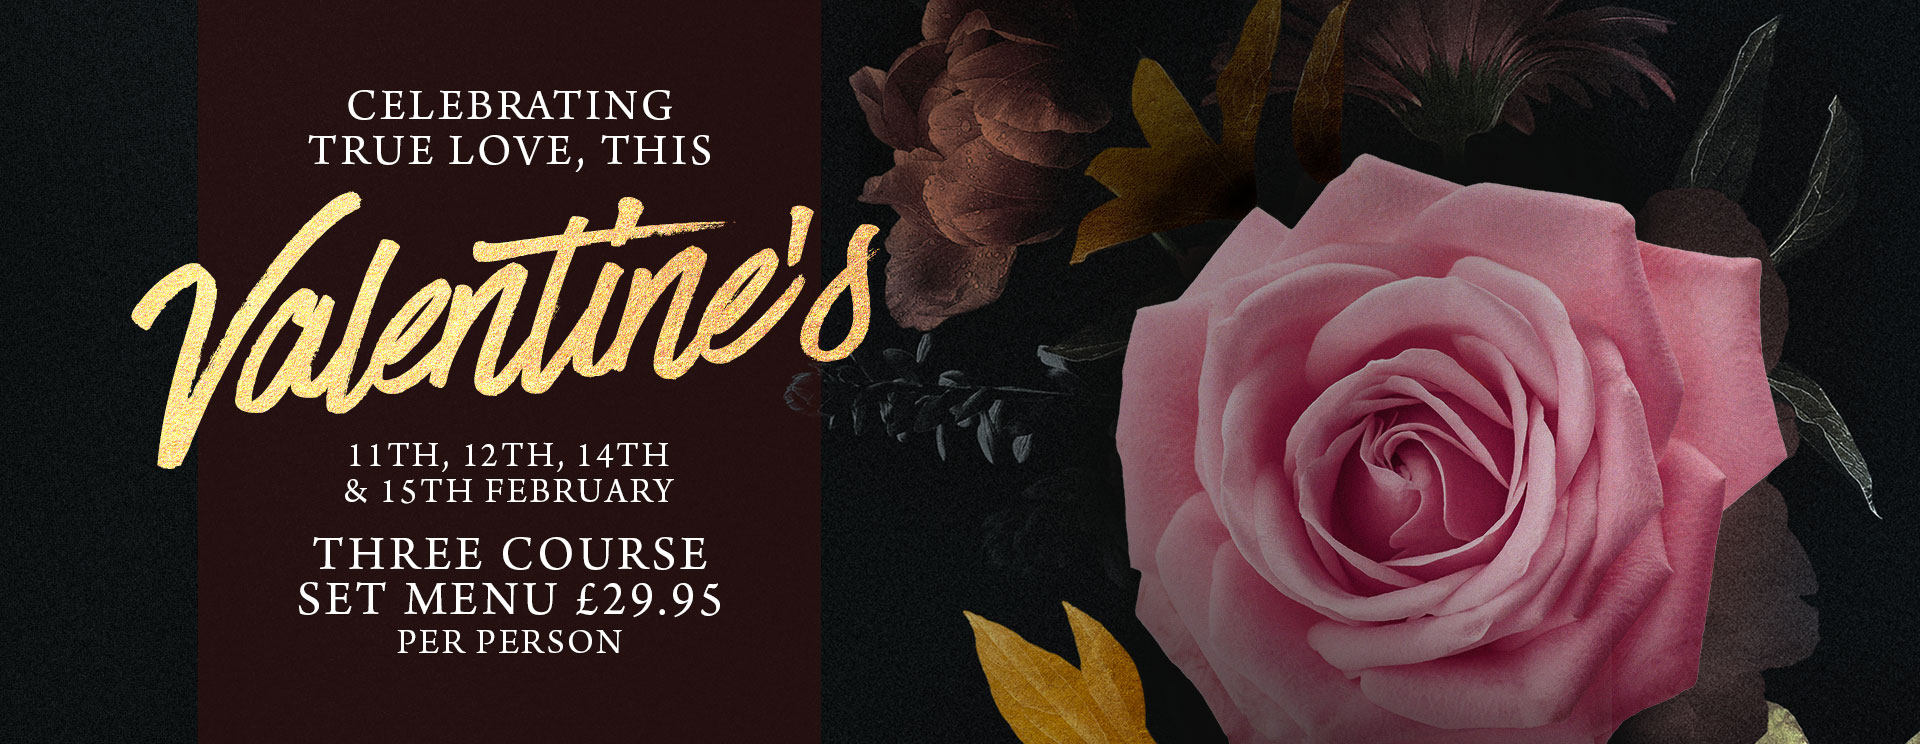 Valentines at The Fox & Hounds